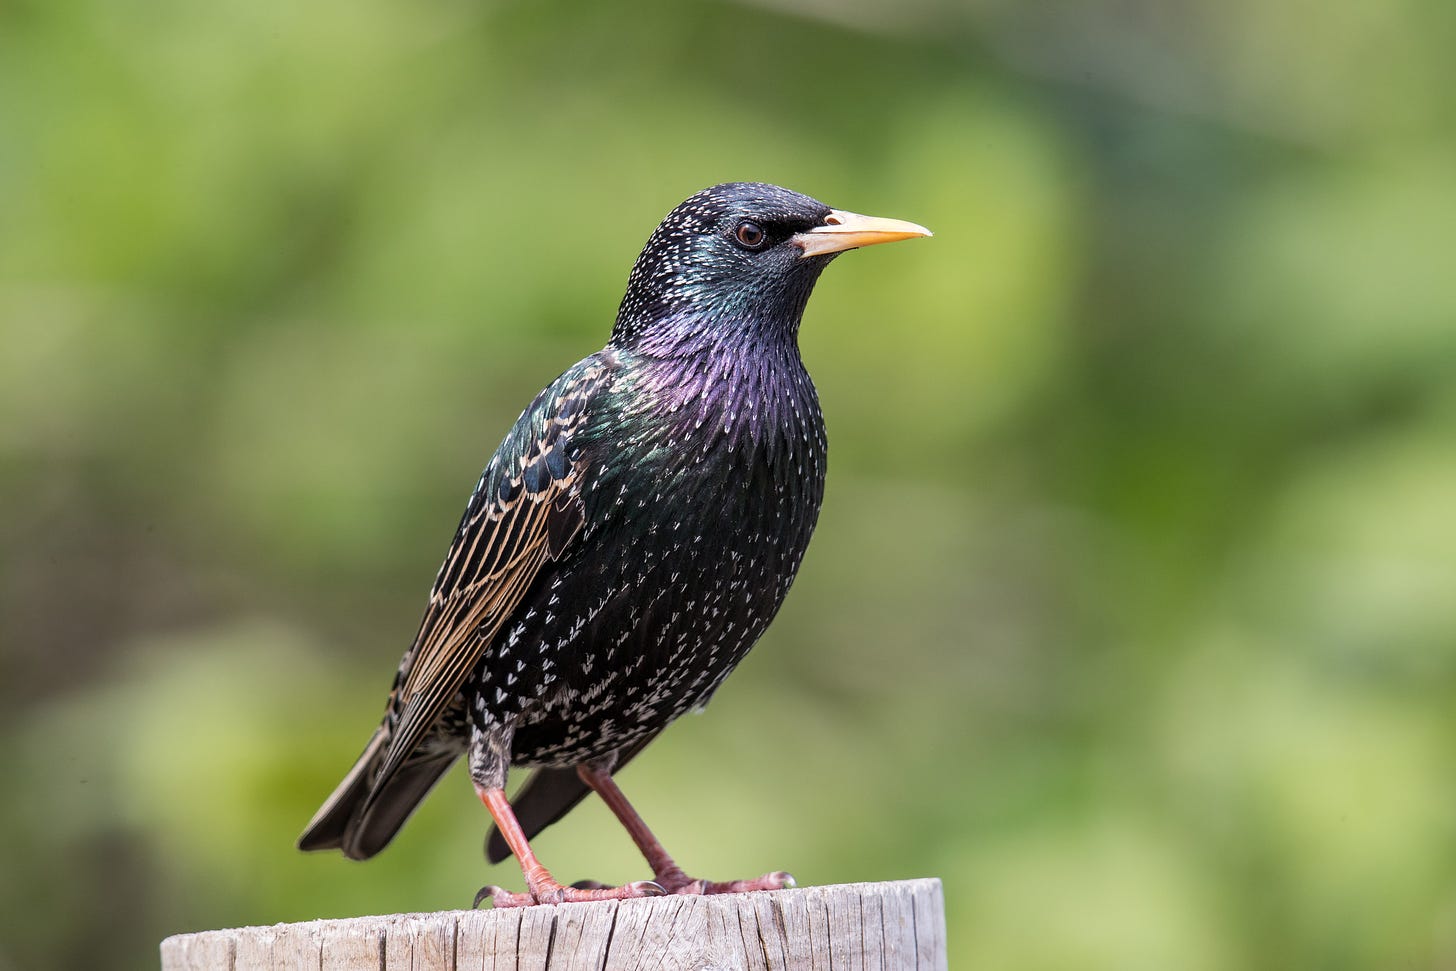 a European starling stands on a log. It's black with white flecks down its body and iridescent feathers along its neck.